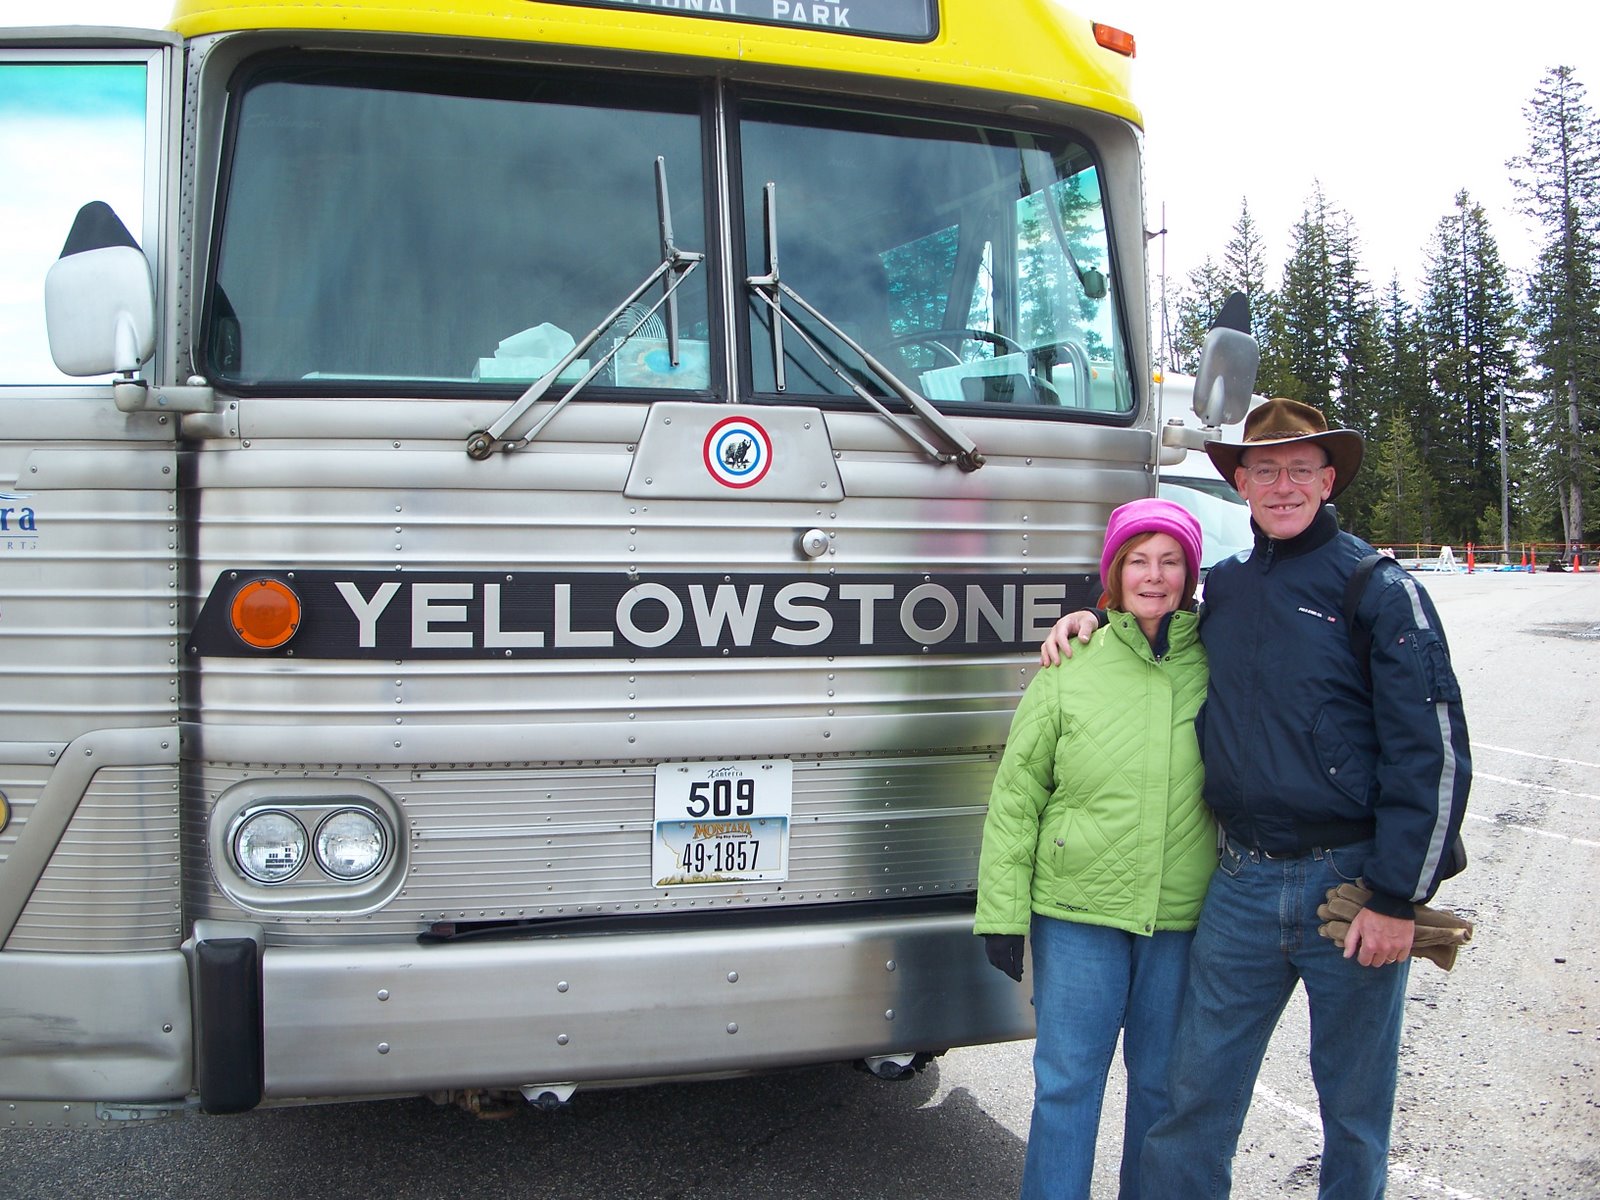 [Bruce+and+Jenna+in+front+of+Yellowstone+tour+bus.JPG]